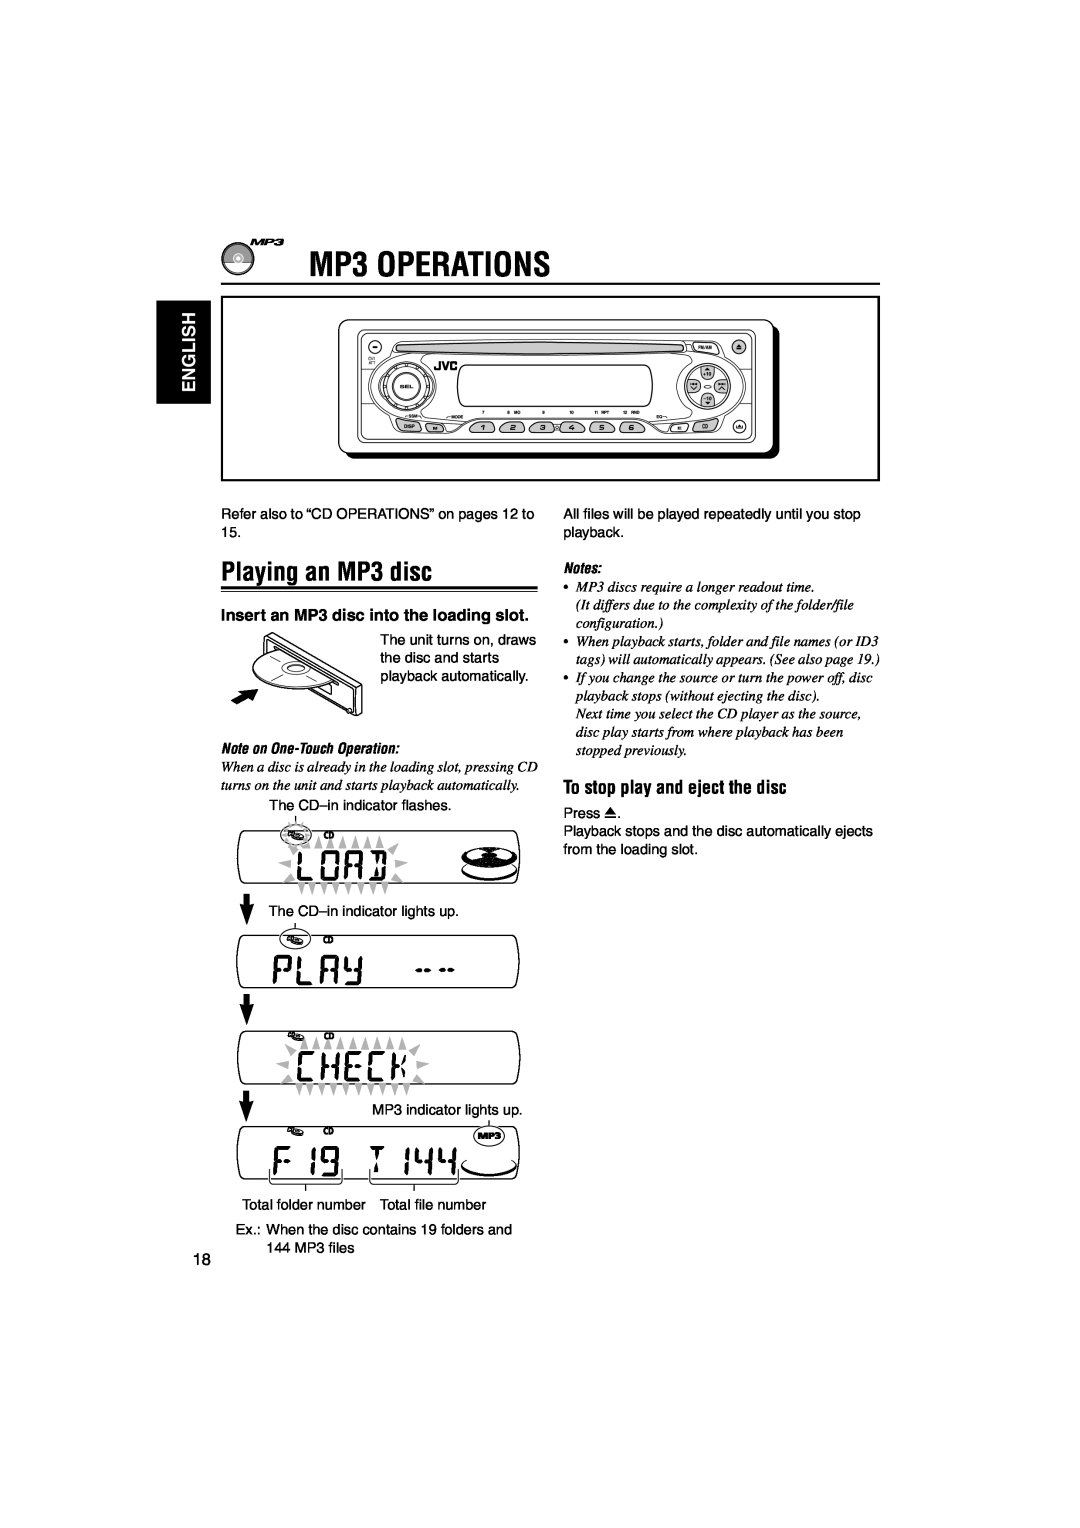 JVC KD-S890 MP3 OPERATIONS, Playing an MP3 disc, To stop play and eject the disc, English, Note on One-TouchOperation 